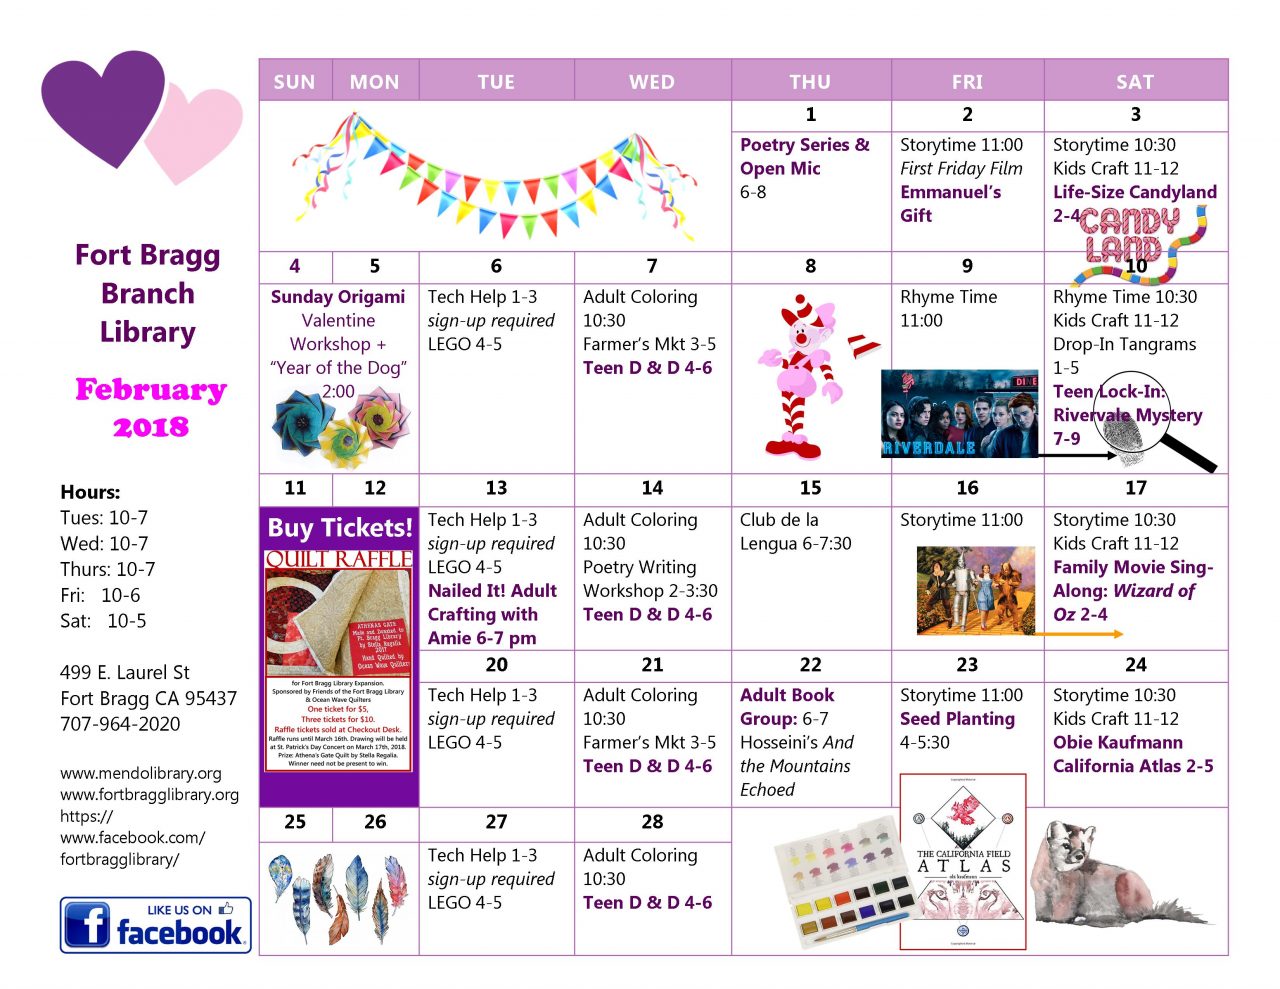 February 2018 Calendar of Events Fort Bragg Library